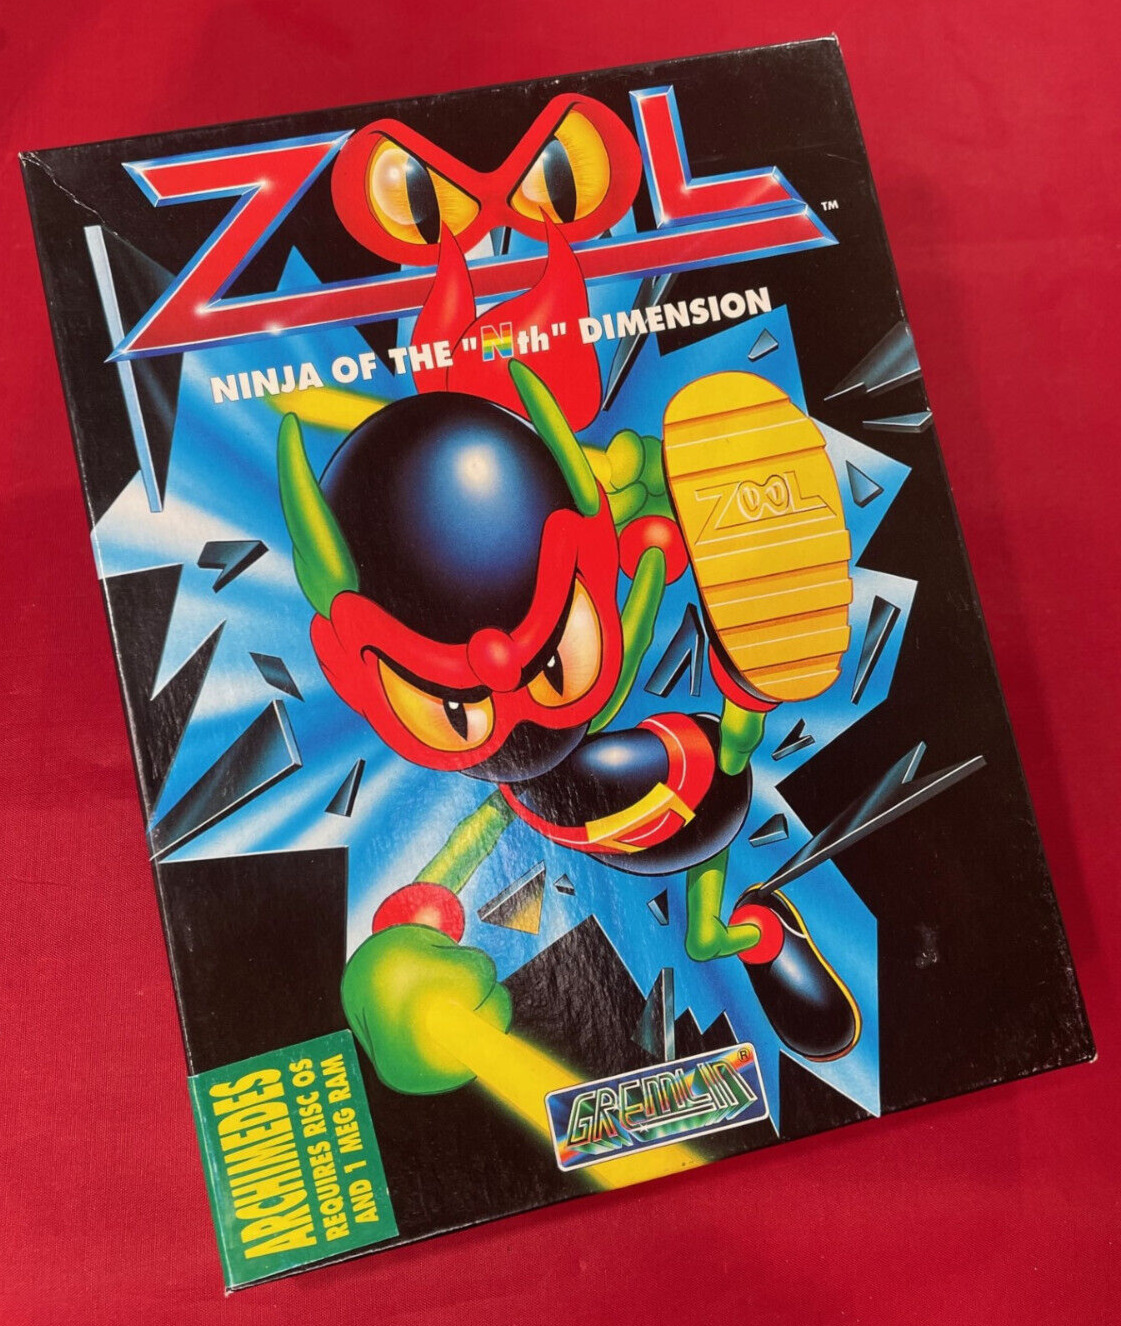 Zool Ninja of the N\'th Dimension Boxed Classic Game for Acorn Archimedes